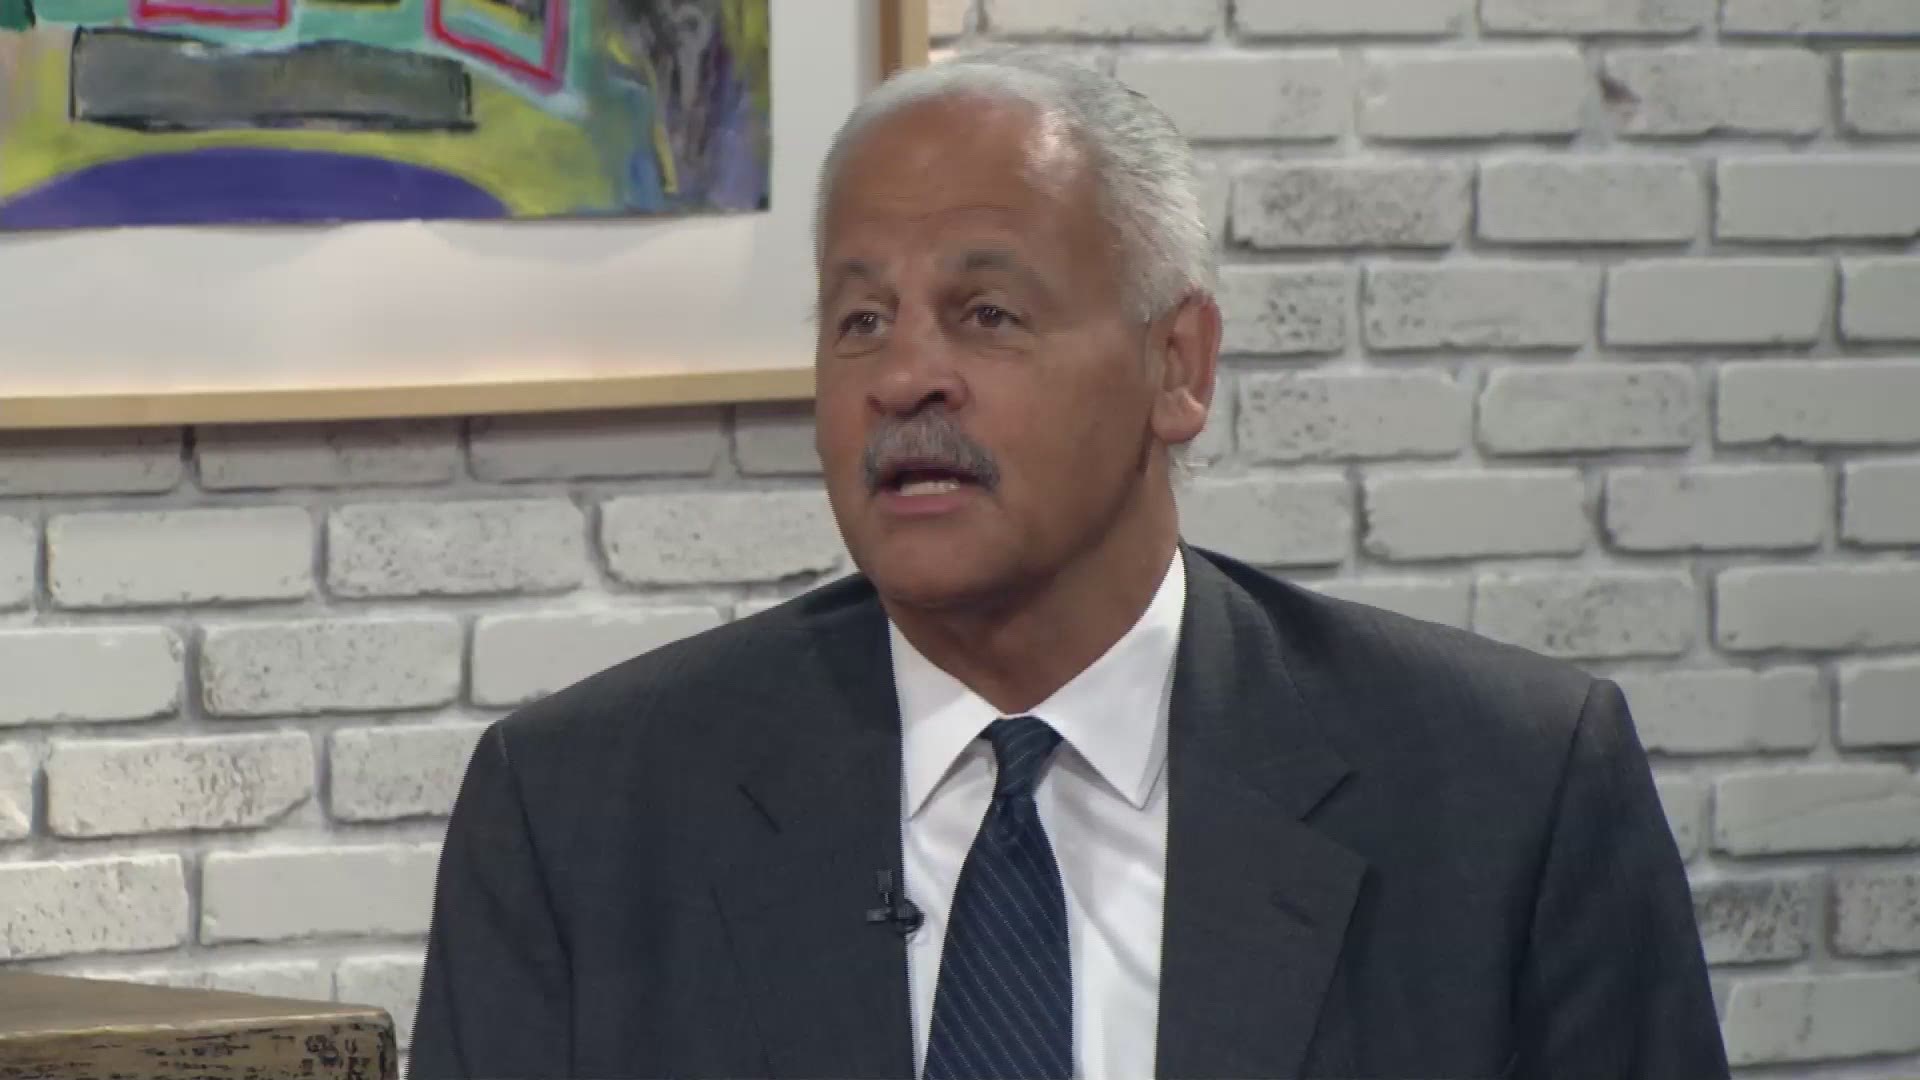 June 14, 2019: 'It’s about identity as a foundation for development, and so I kind of lost mine because of my relationship with Oprah and having to be defined by my relationship and defined by race,' Stedman Graham said. He also discussed more details of his newest book, Identity Leadership.